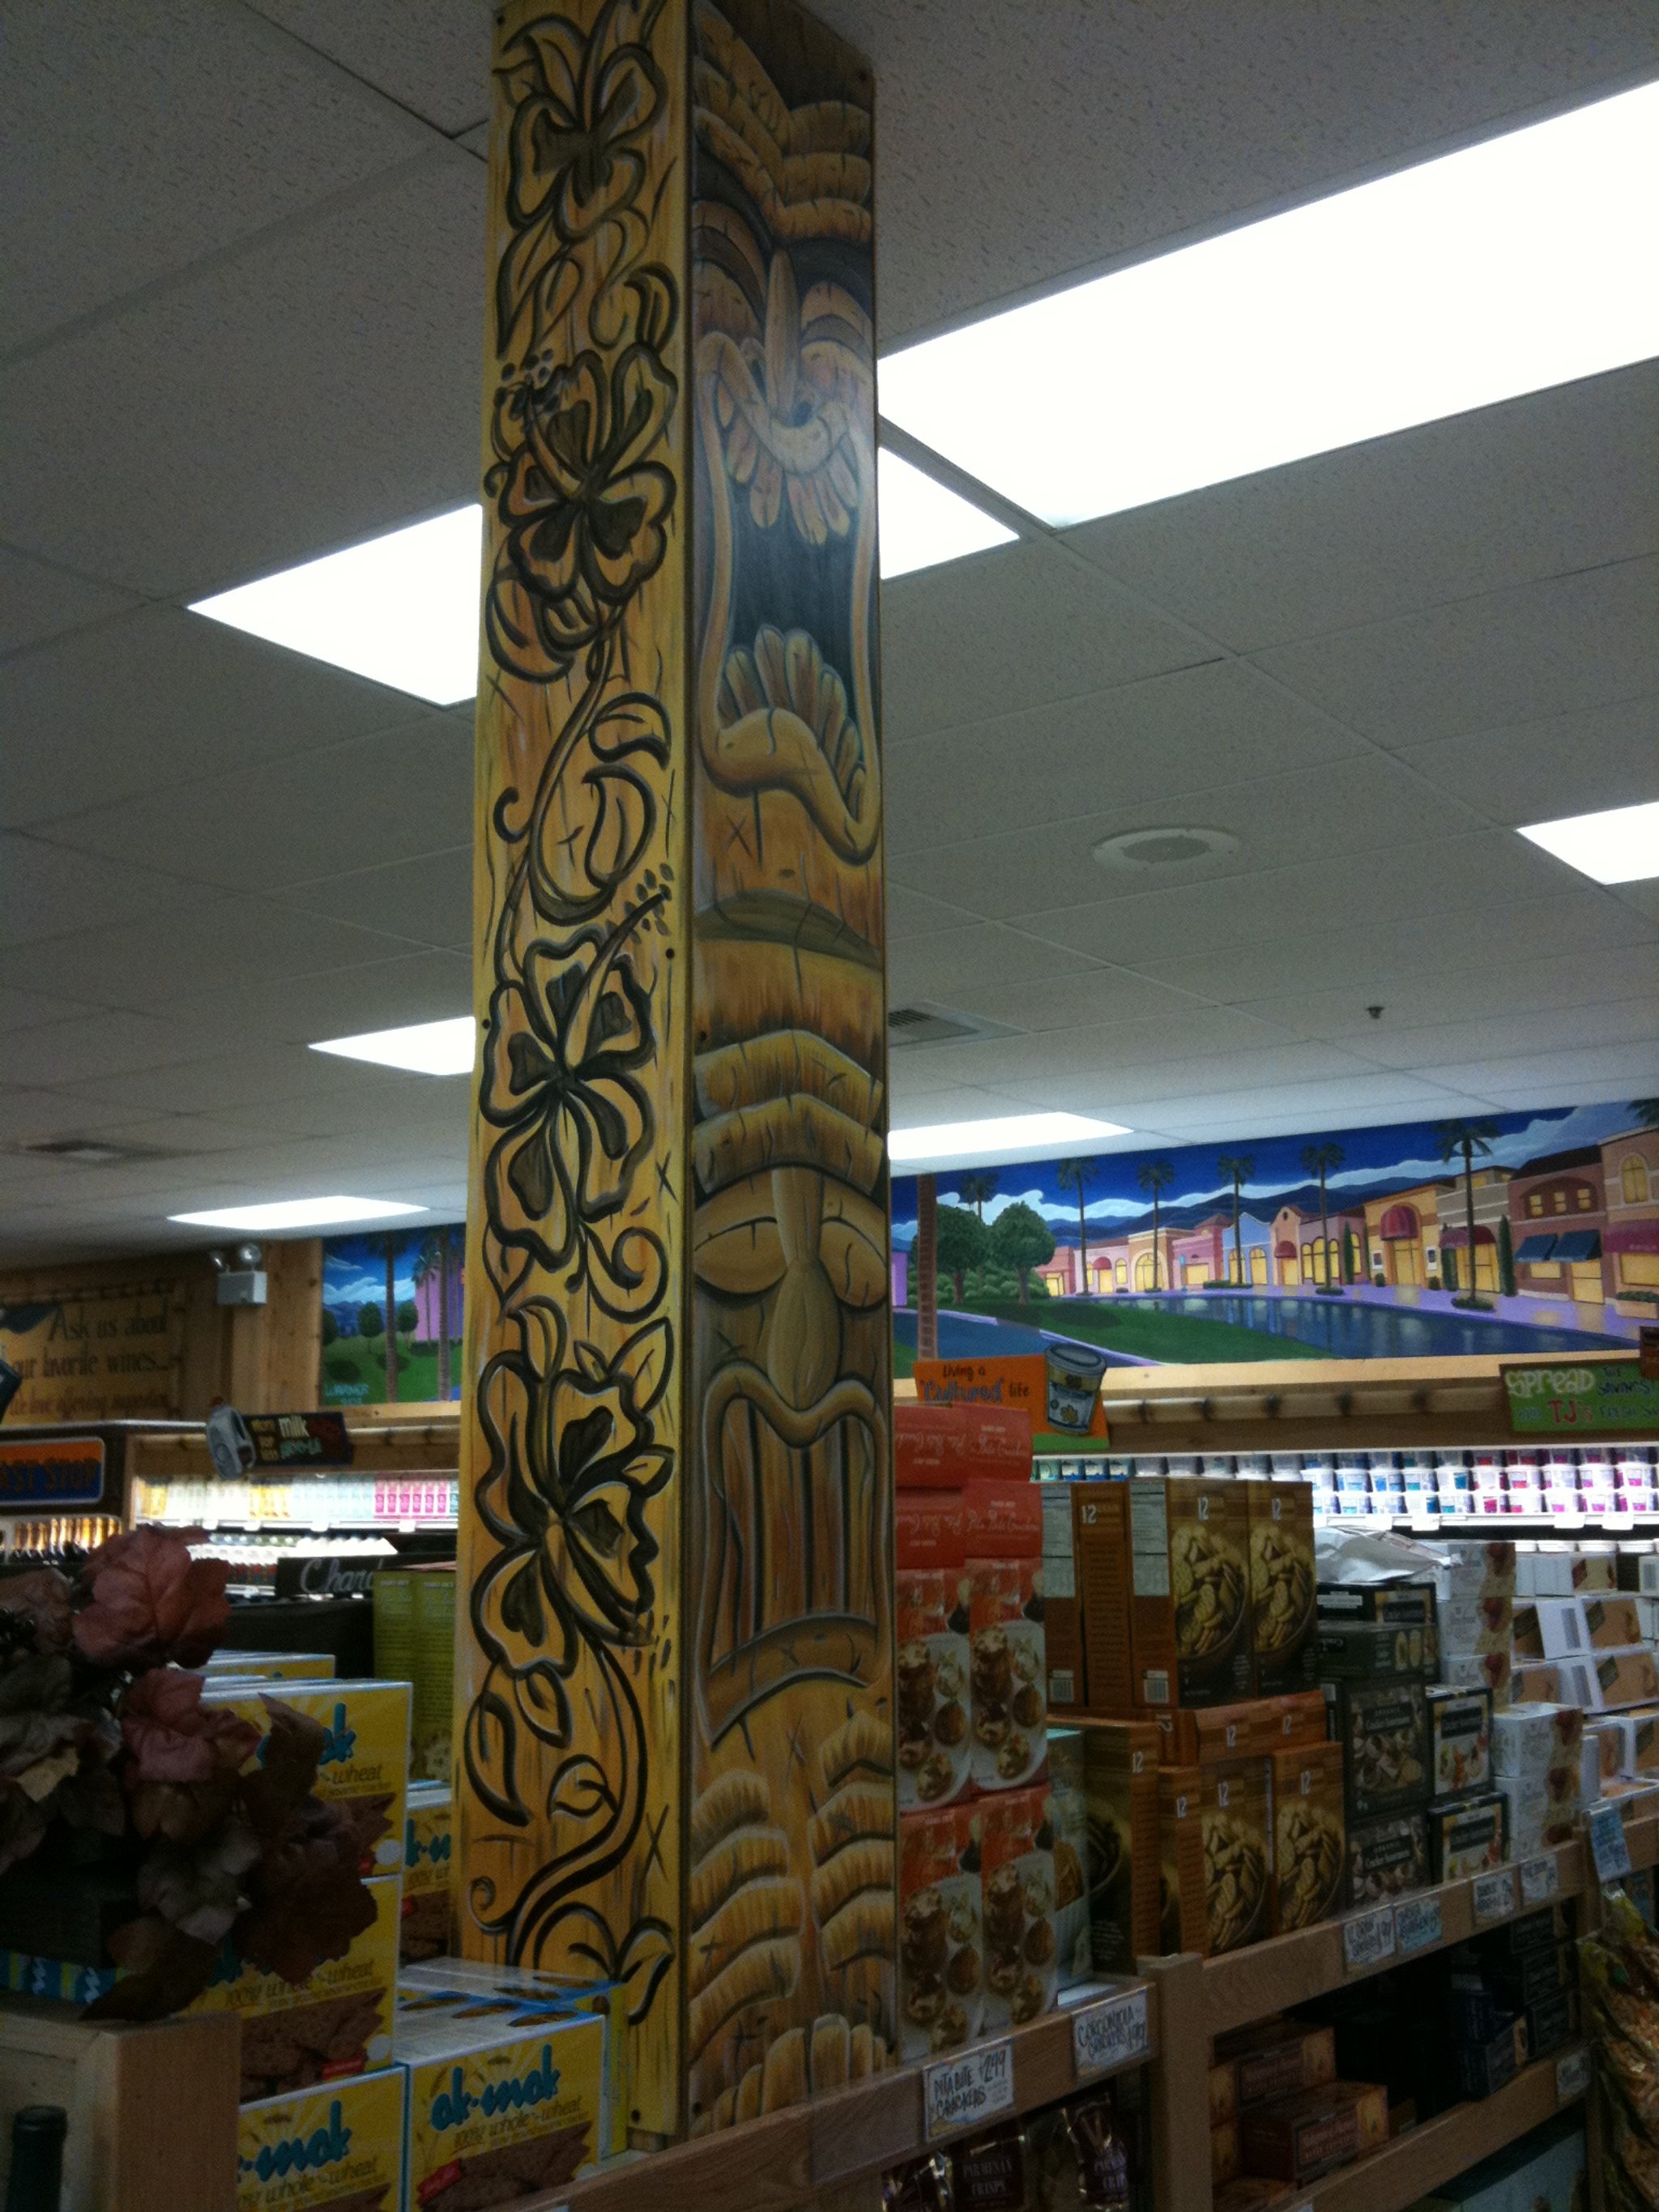  The tiki guy found a home in the wine section.  